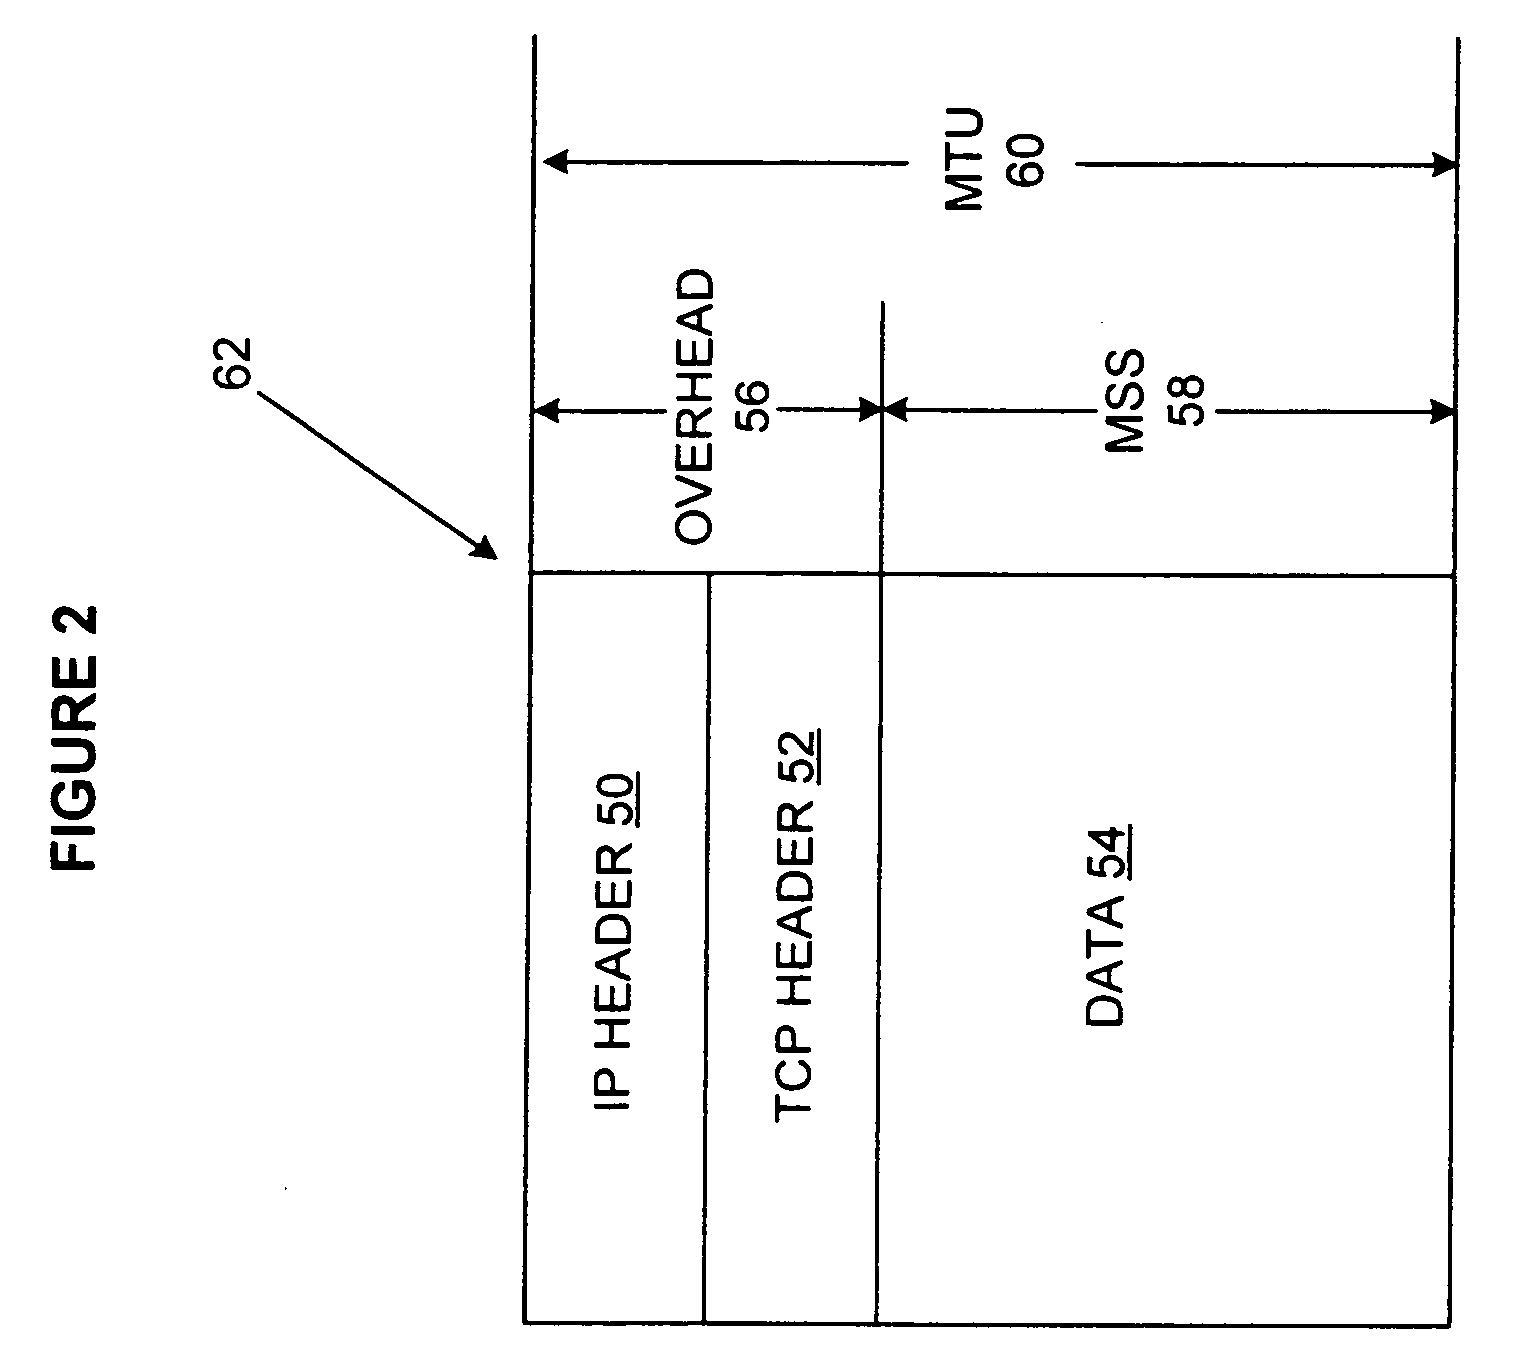 Methods and device for managing message size transmitted over a network